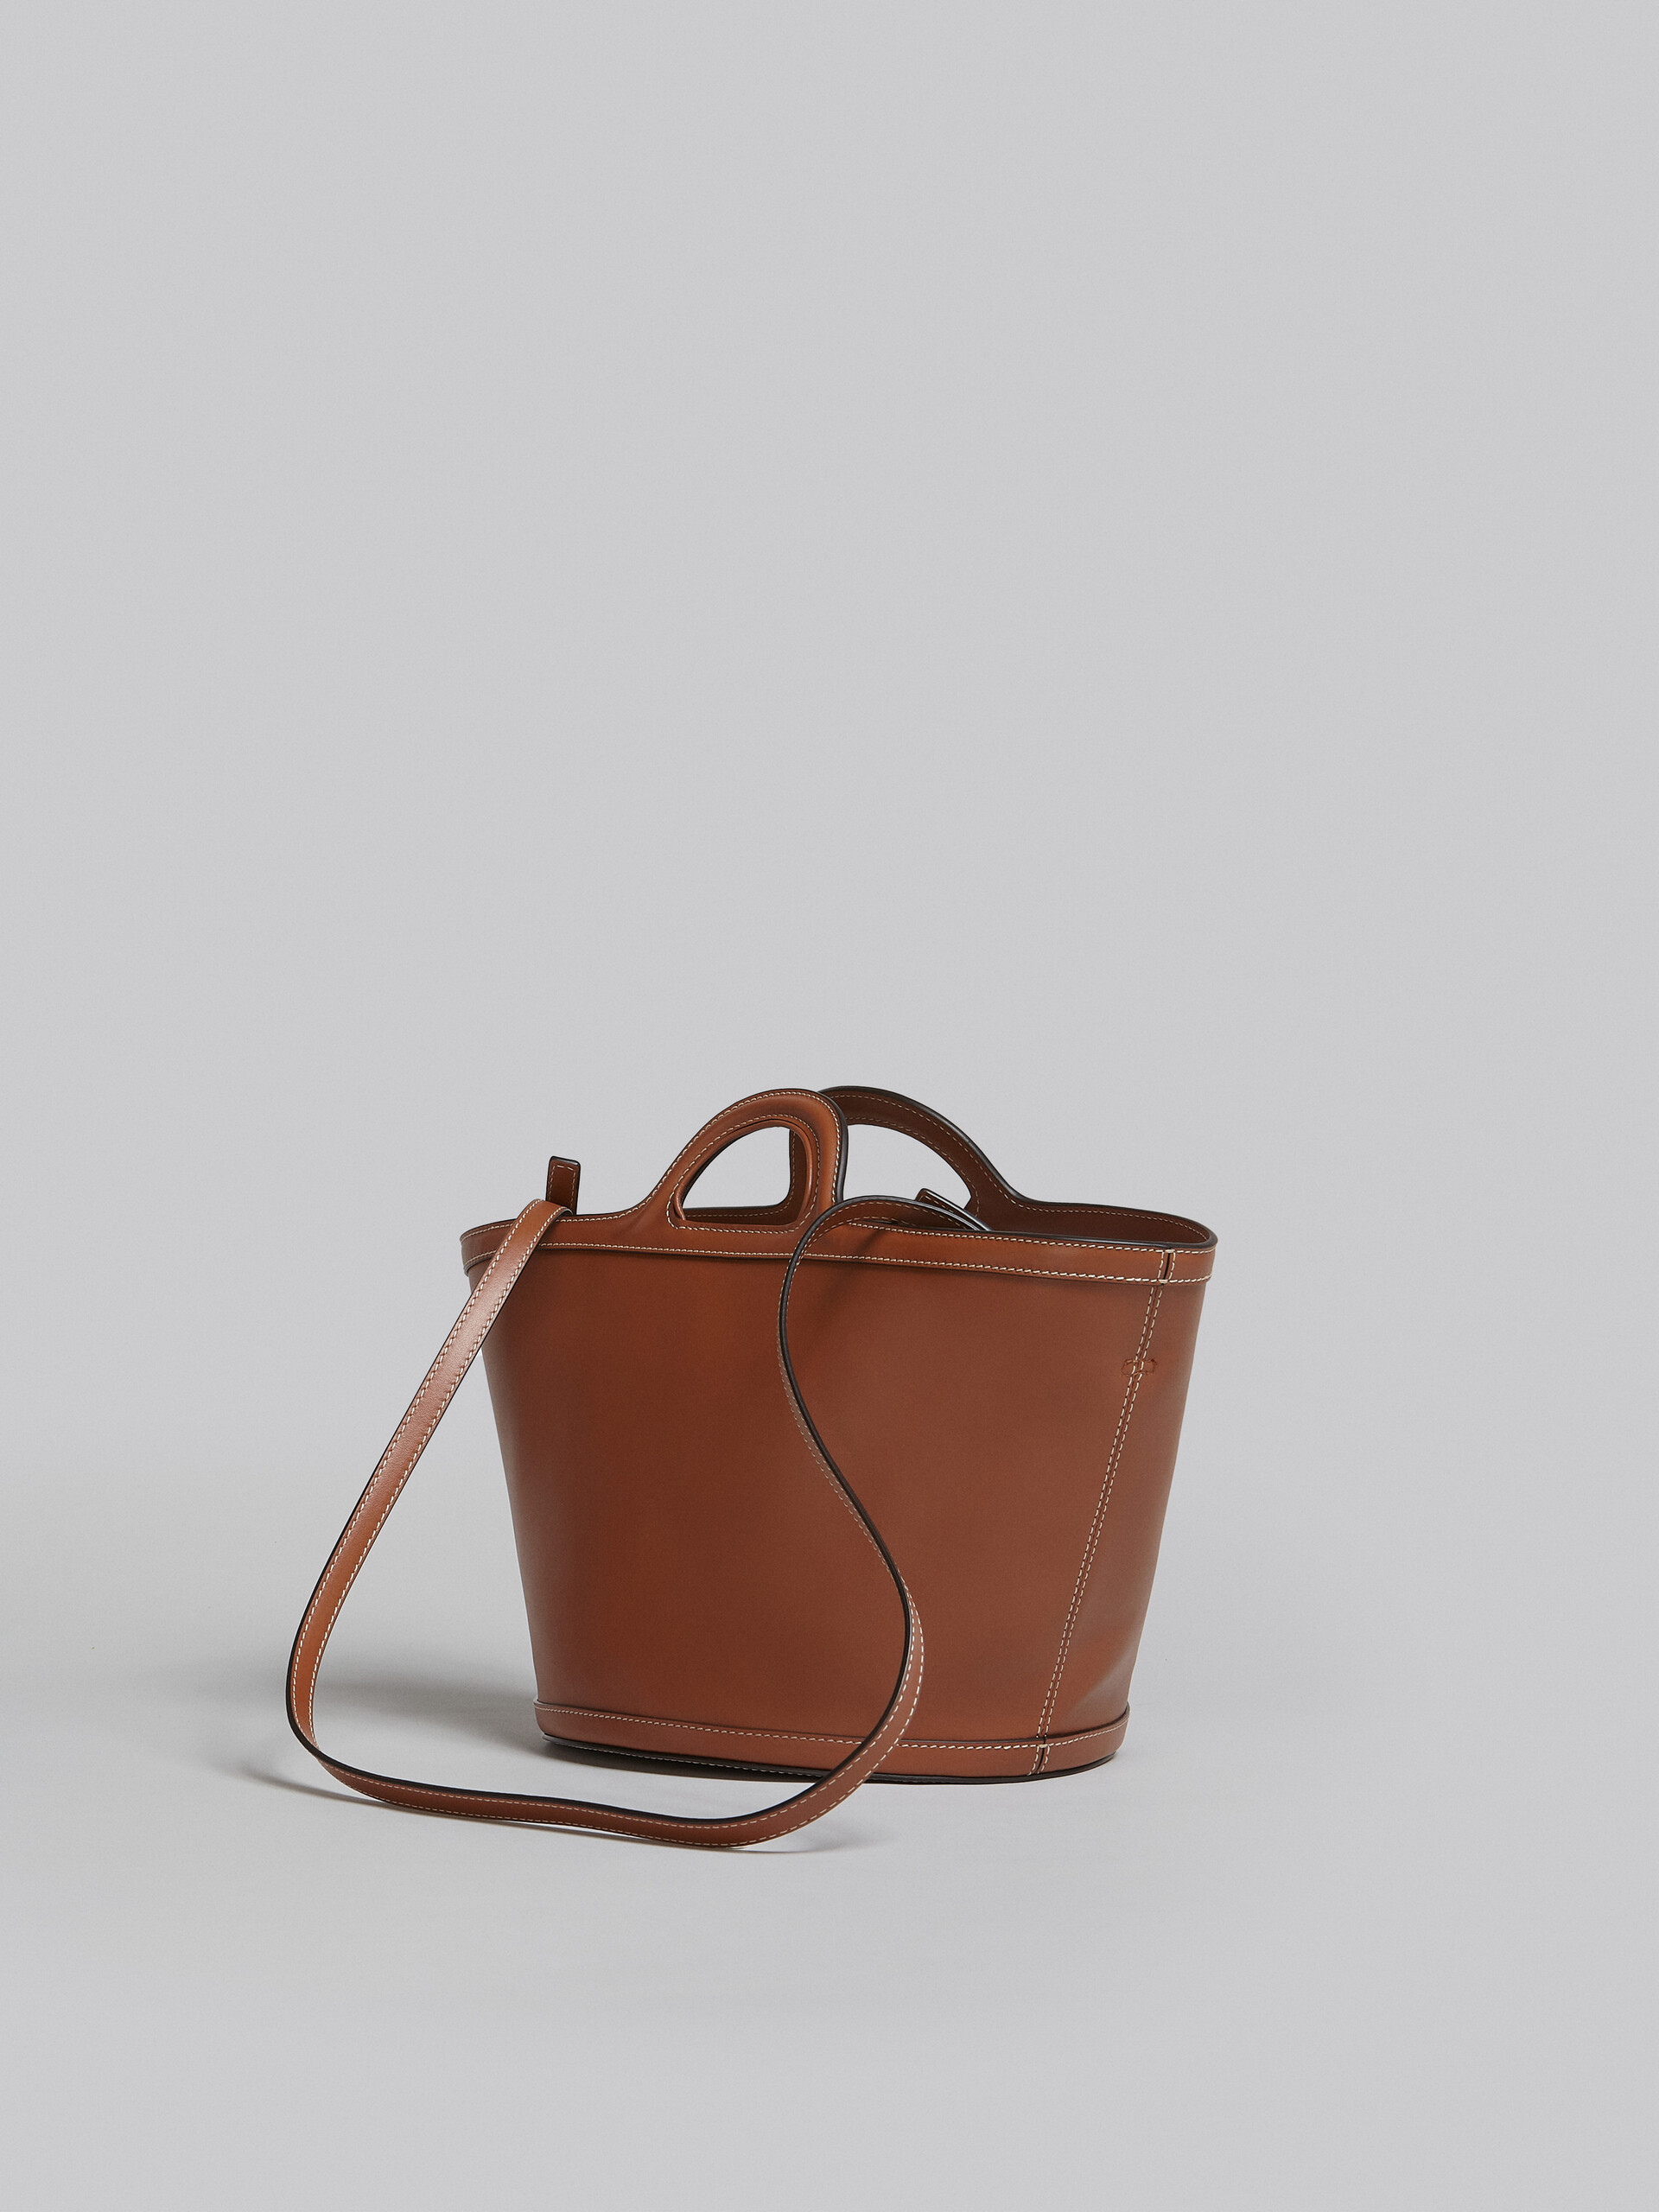 Tropicalia Small Bag in brown leather